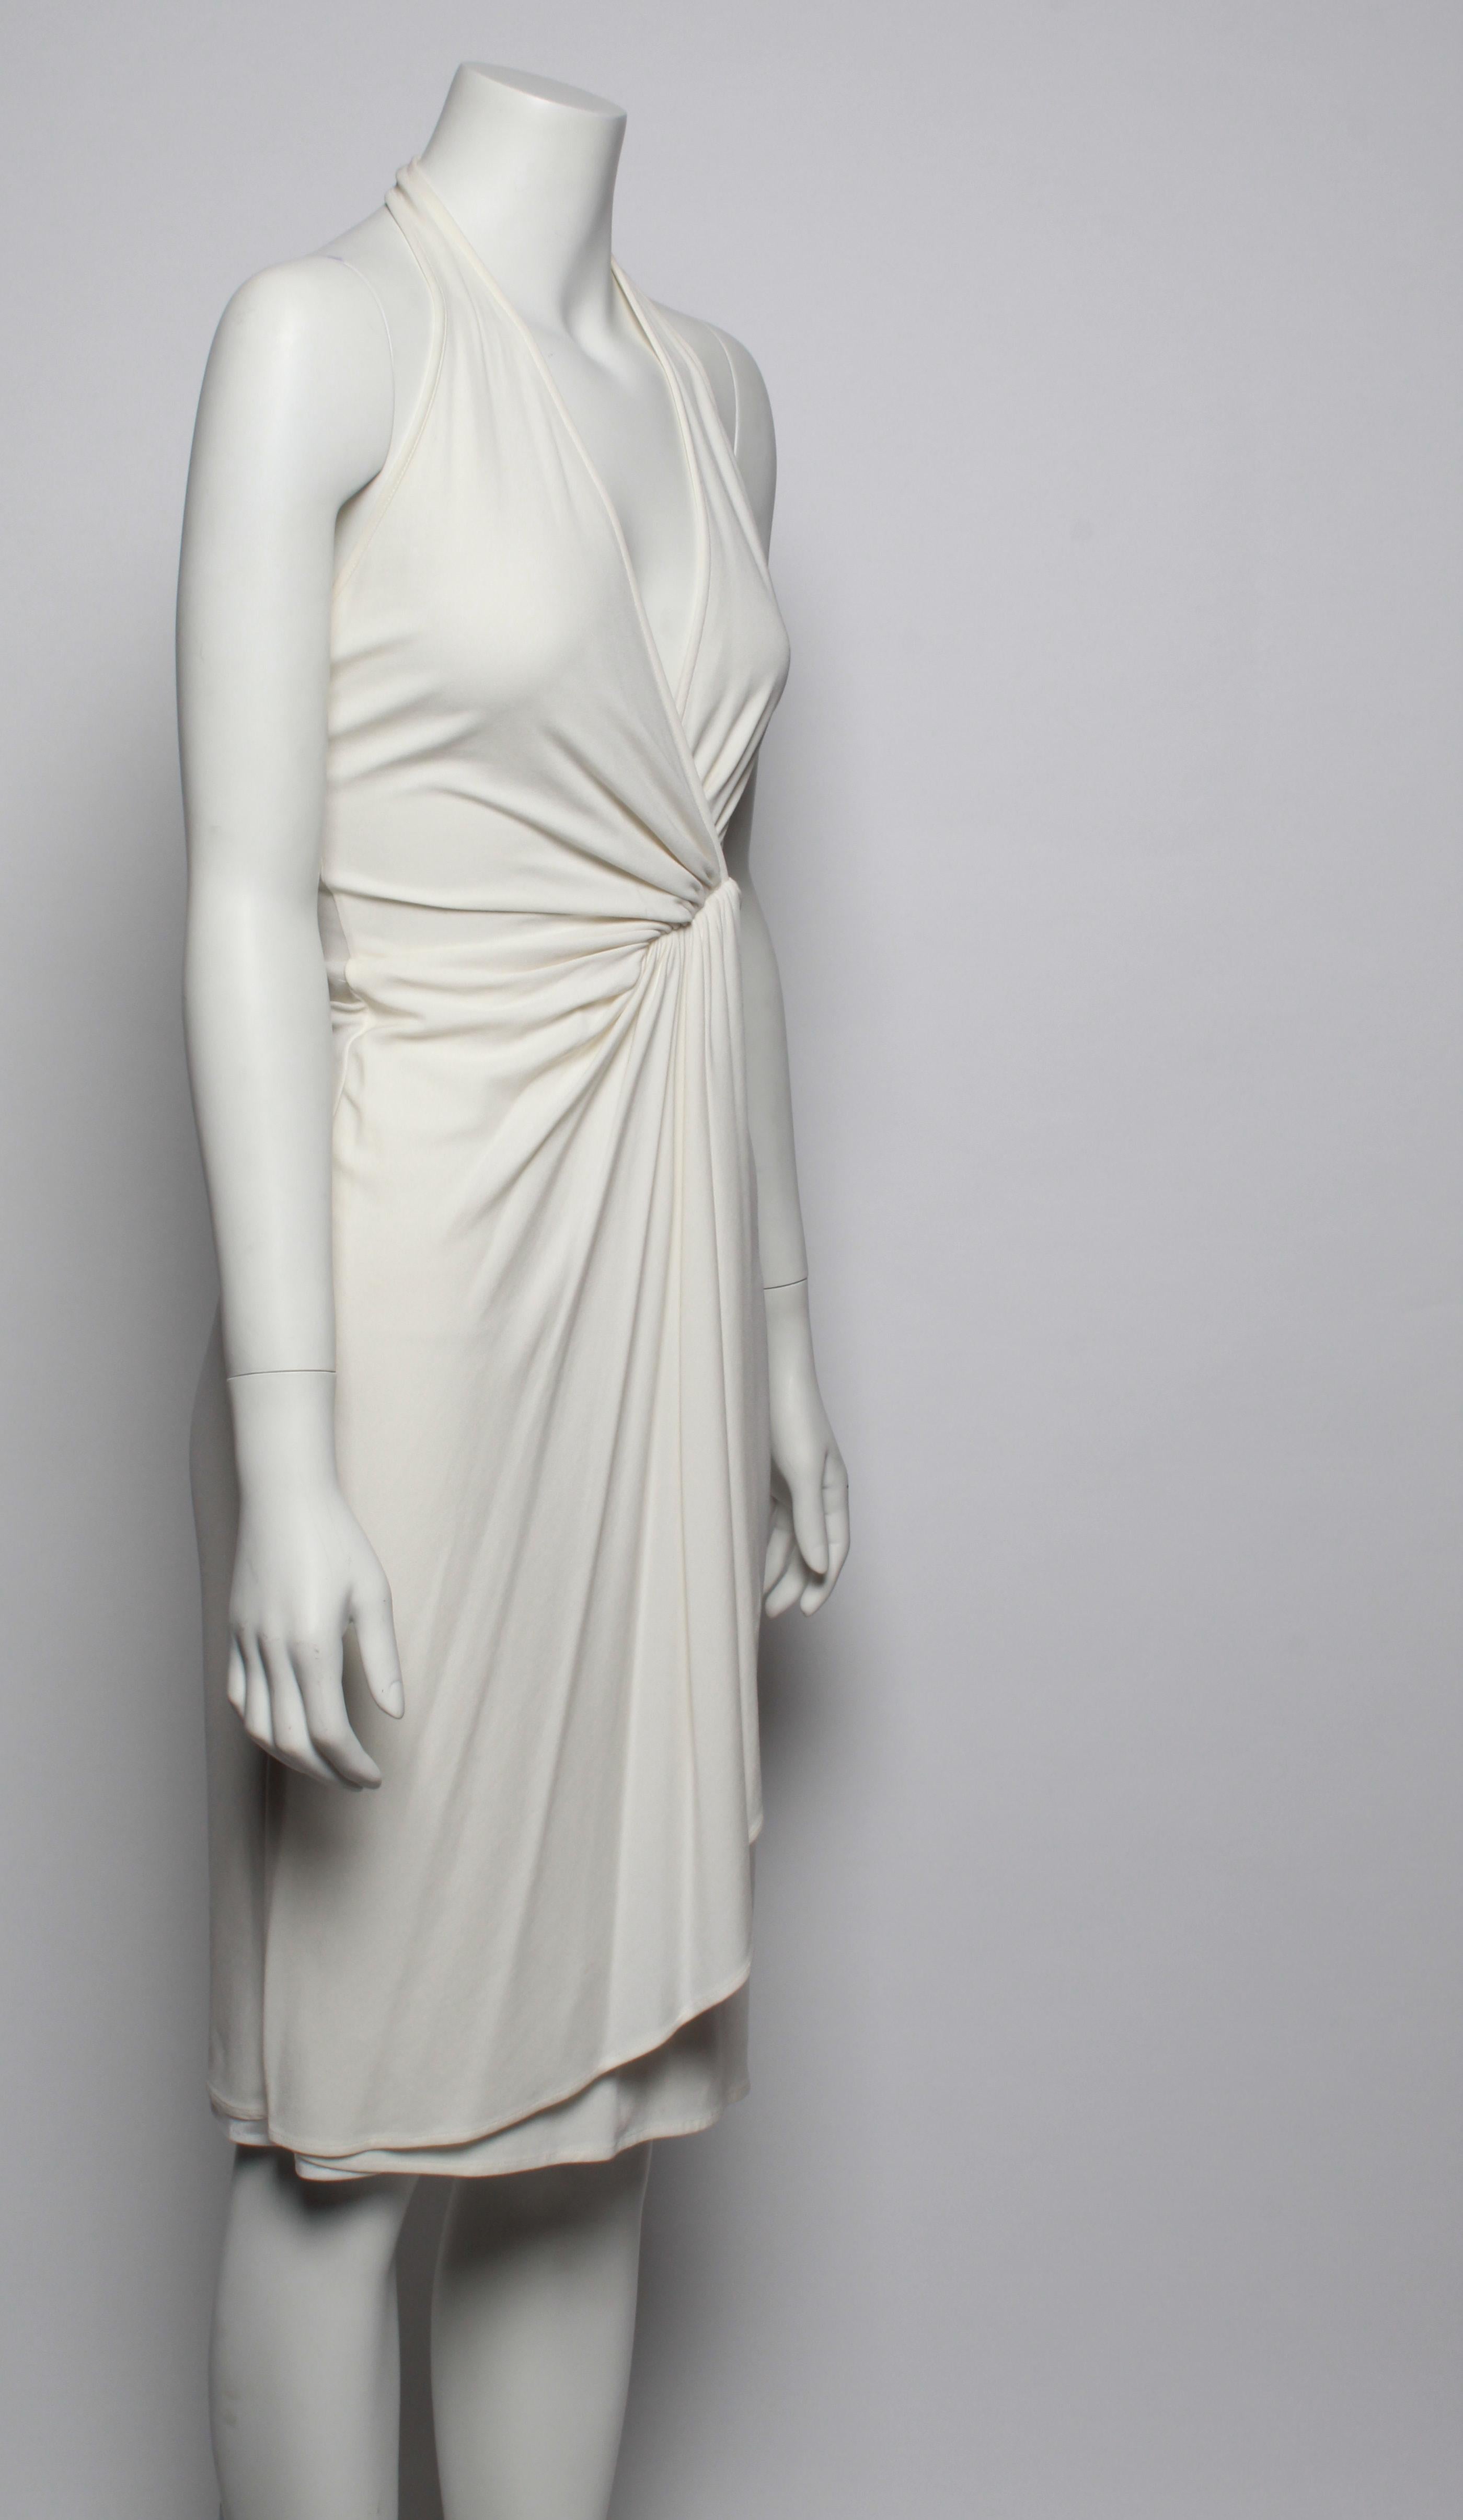 Tom Ford for Gucci 90's Sexy Wrap Halter Cocktail Dress
Designer size S
White Stretch Jersey
Simple Slip On
Made in Italy